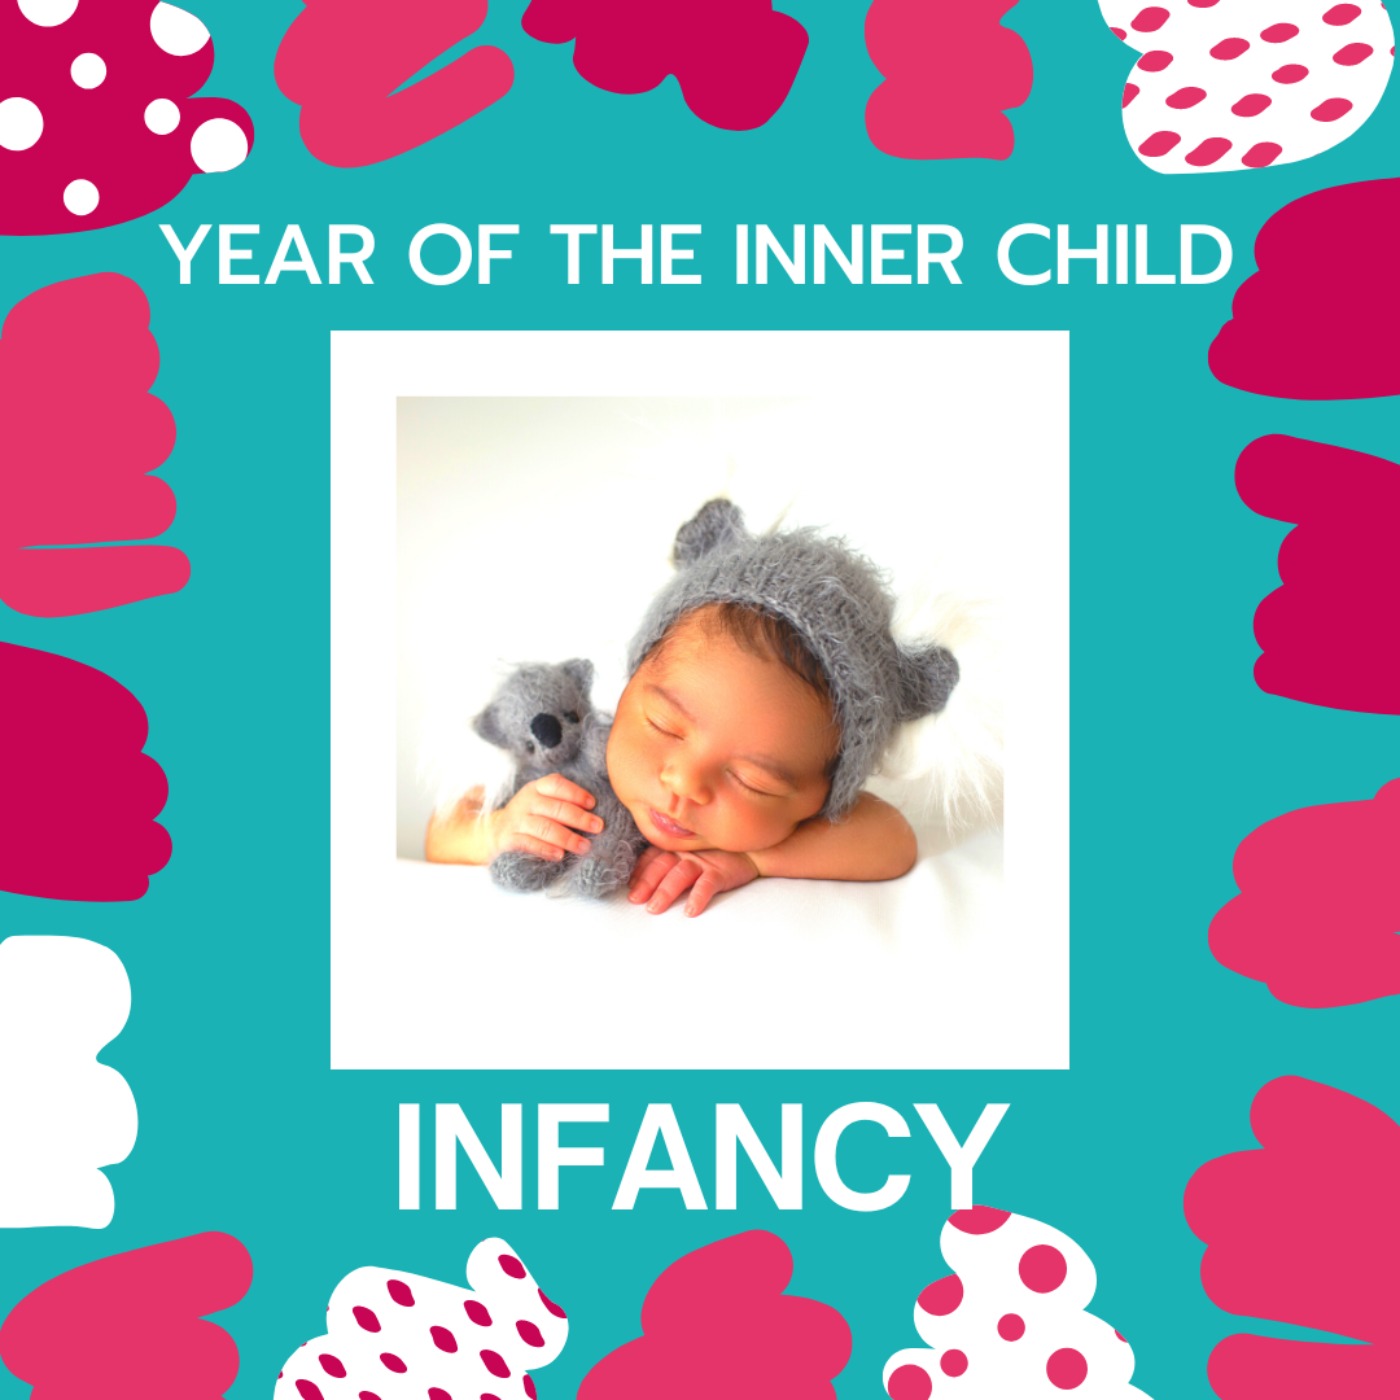 Year of the Inner Child: Infancy